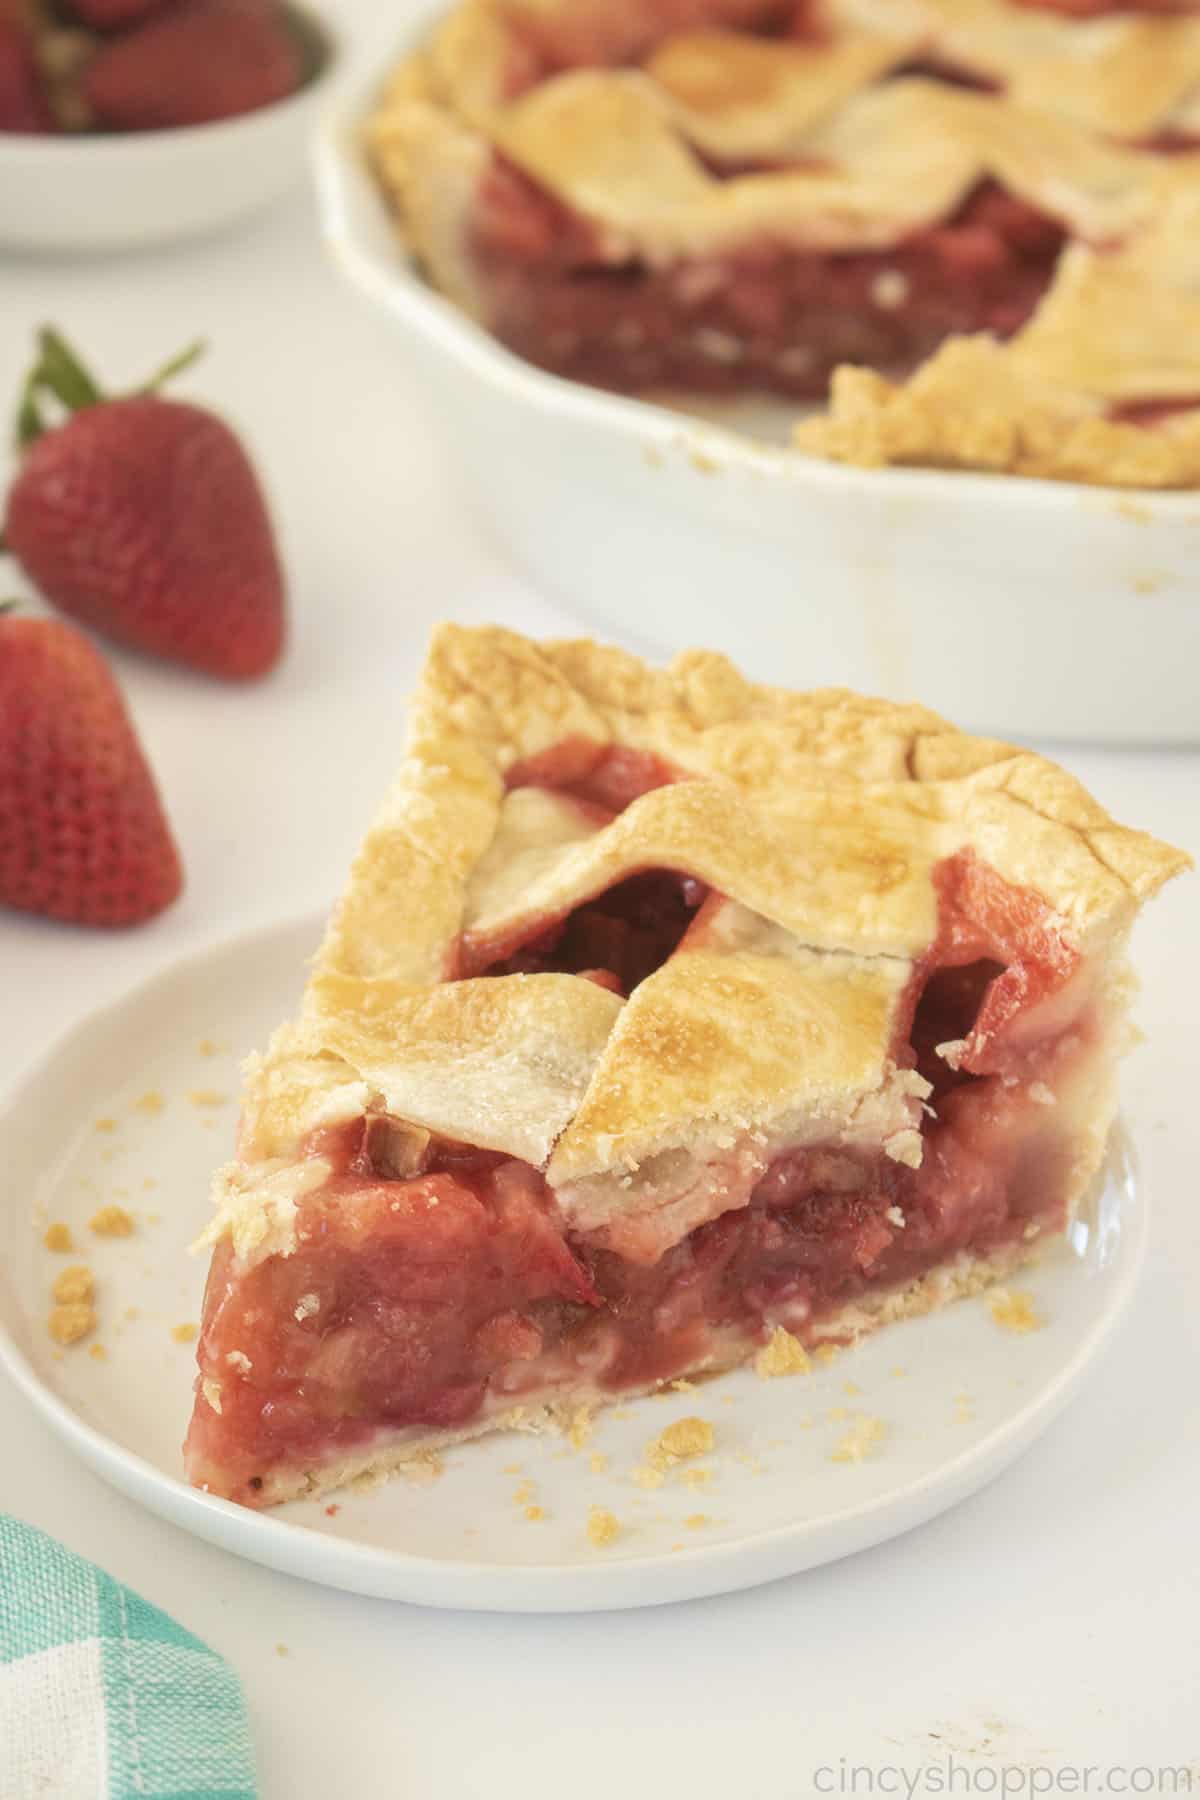 Slice of Old Fashioned strawberry Pie on a plate.